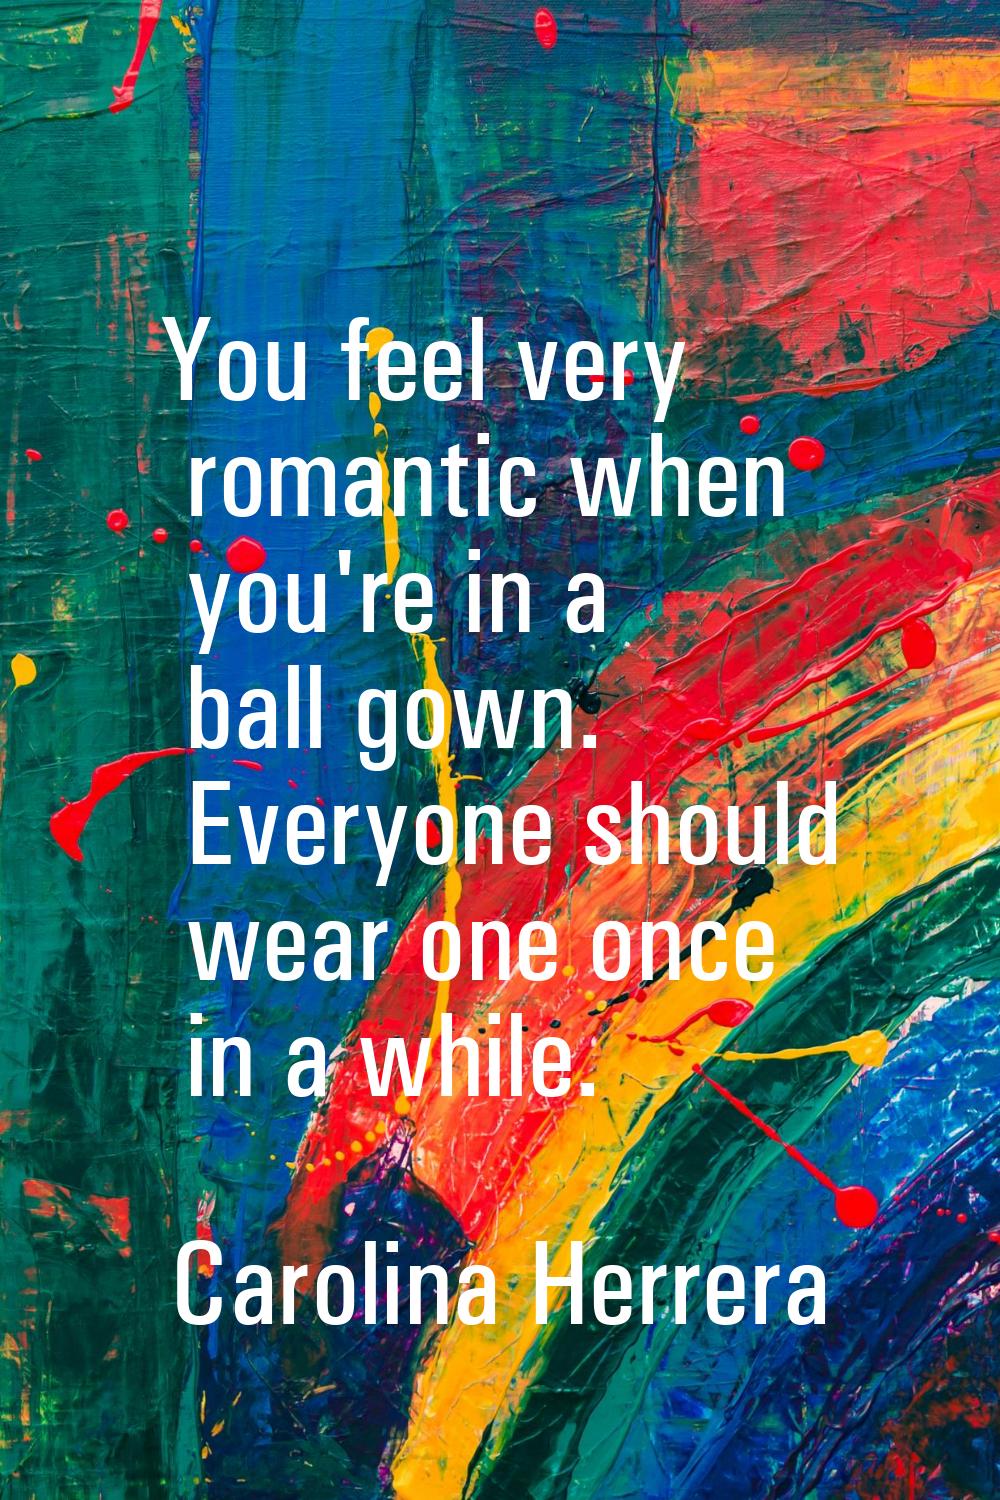 You feel very romantic when you're in a ball gown. Everyone should wear one once in a while.